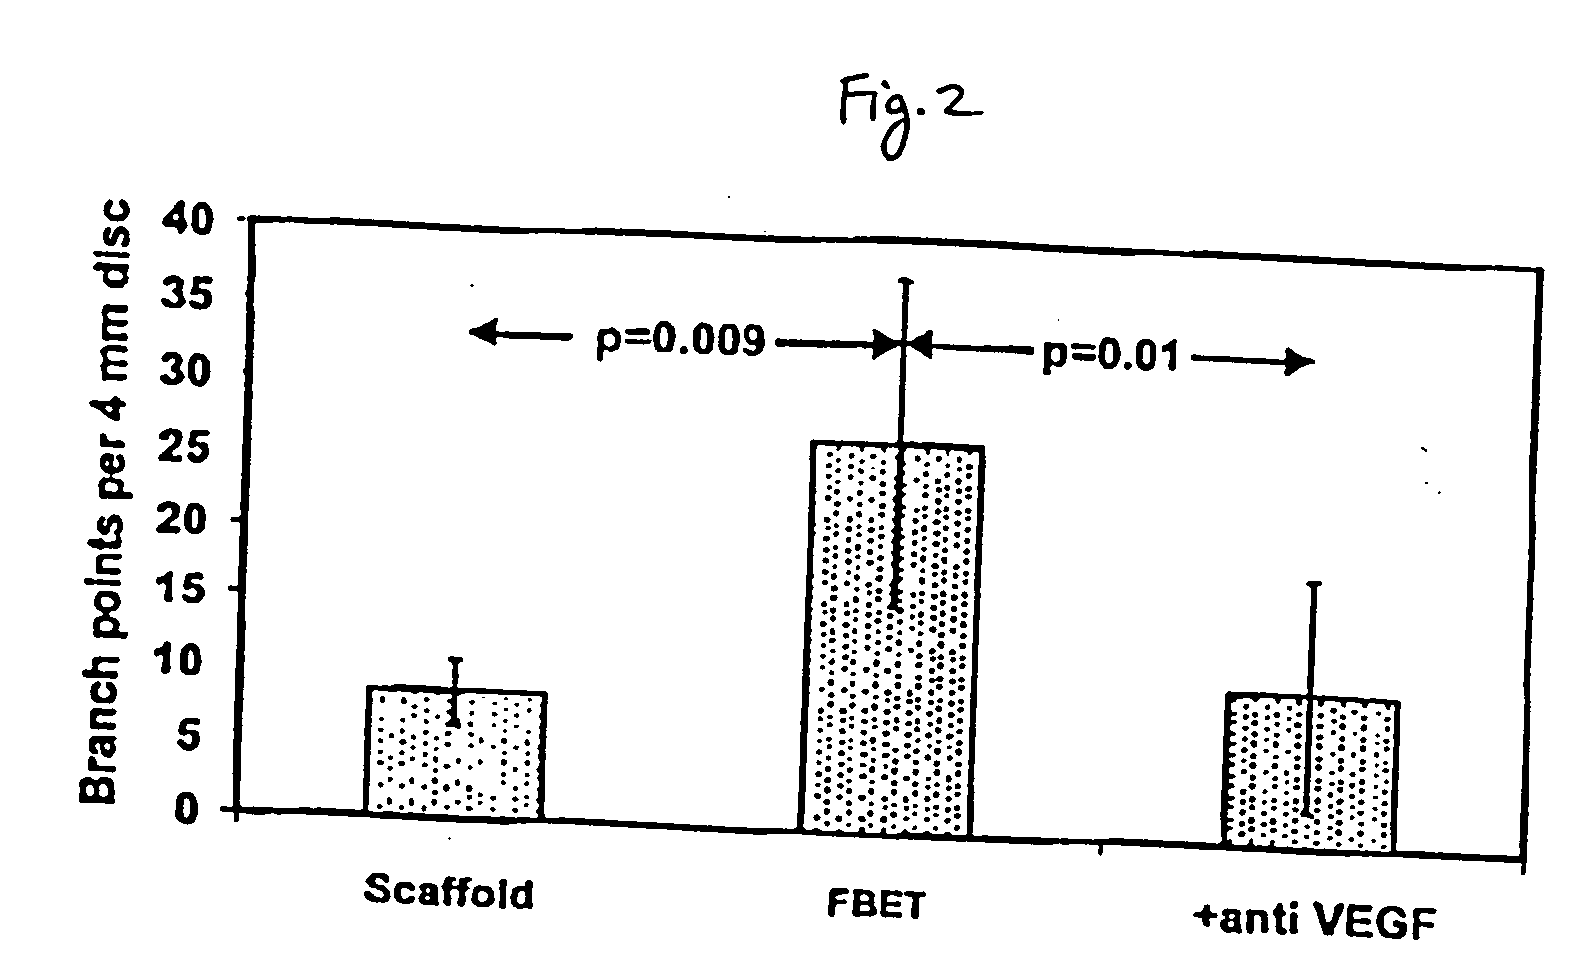 Methods for using a three-dimensional stromal tissue to promote angiogenesis